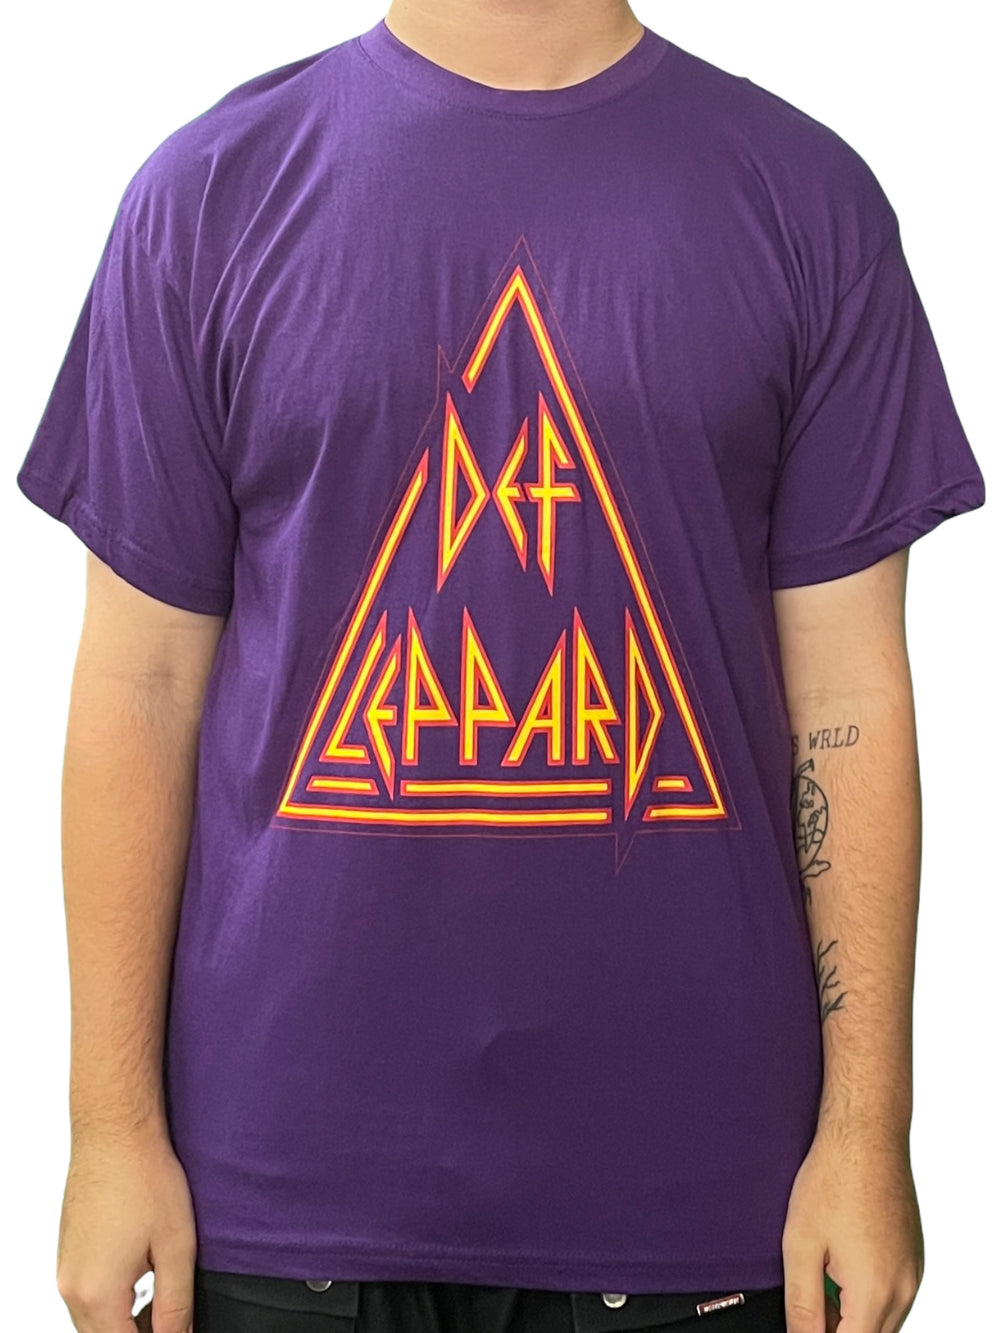 Def Leppard Classic Triangle Logo Official Unisex T Shirt Brand New Various Sizes